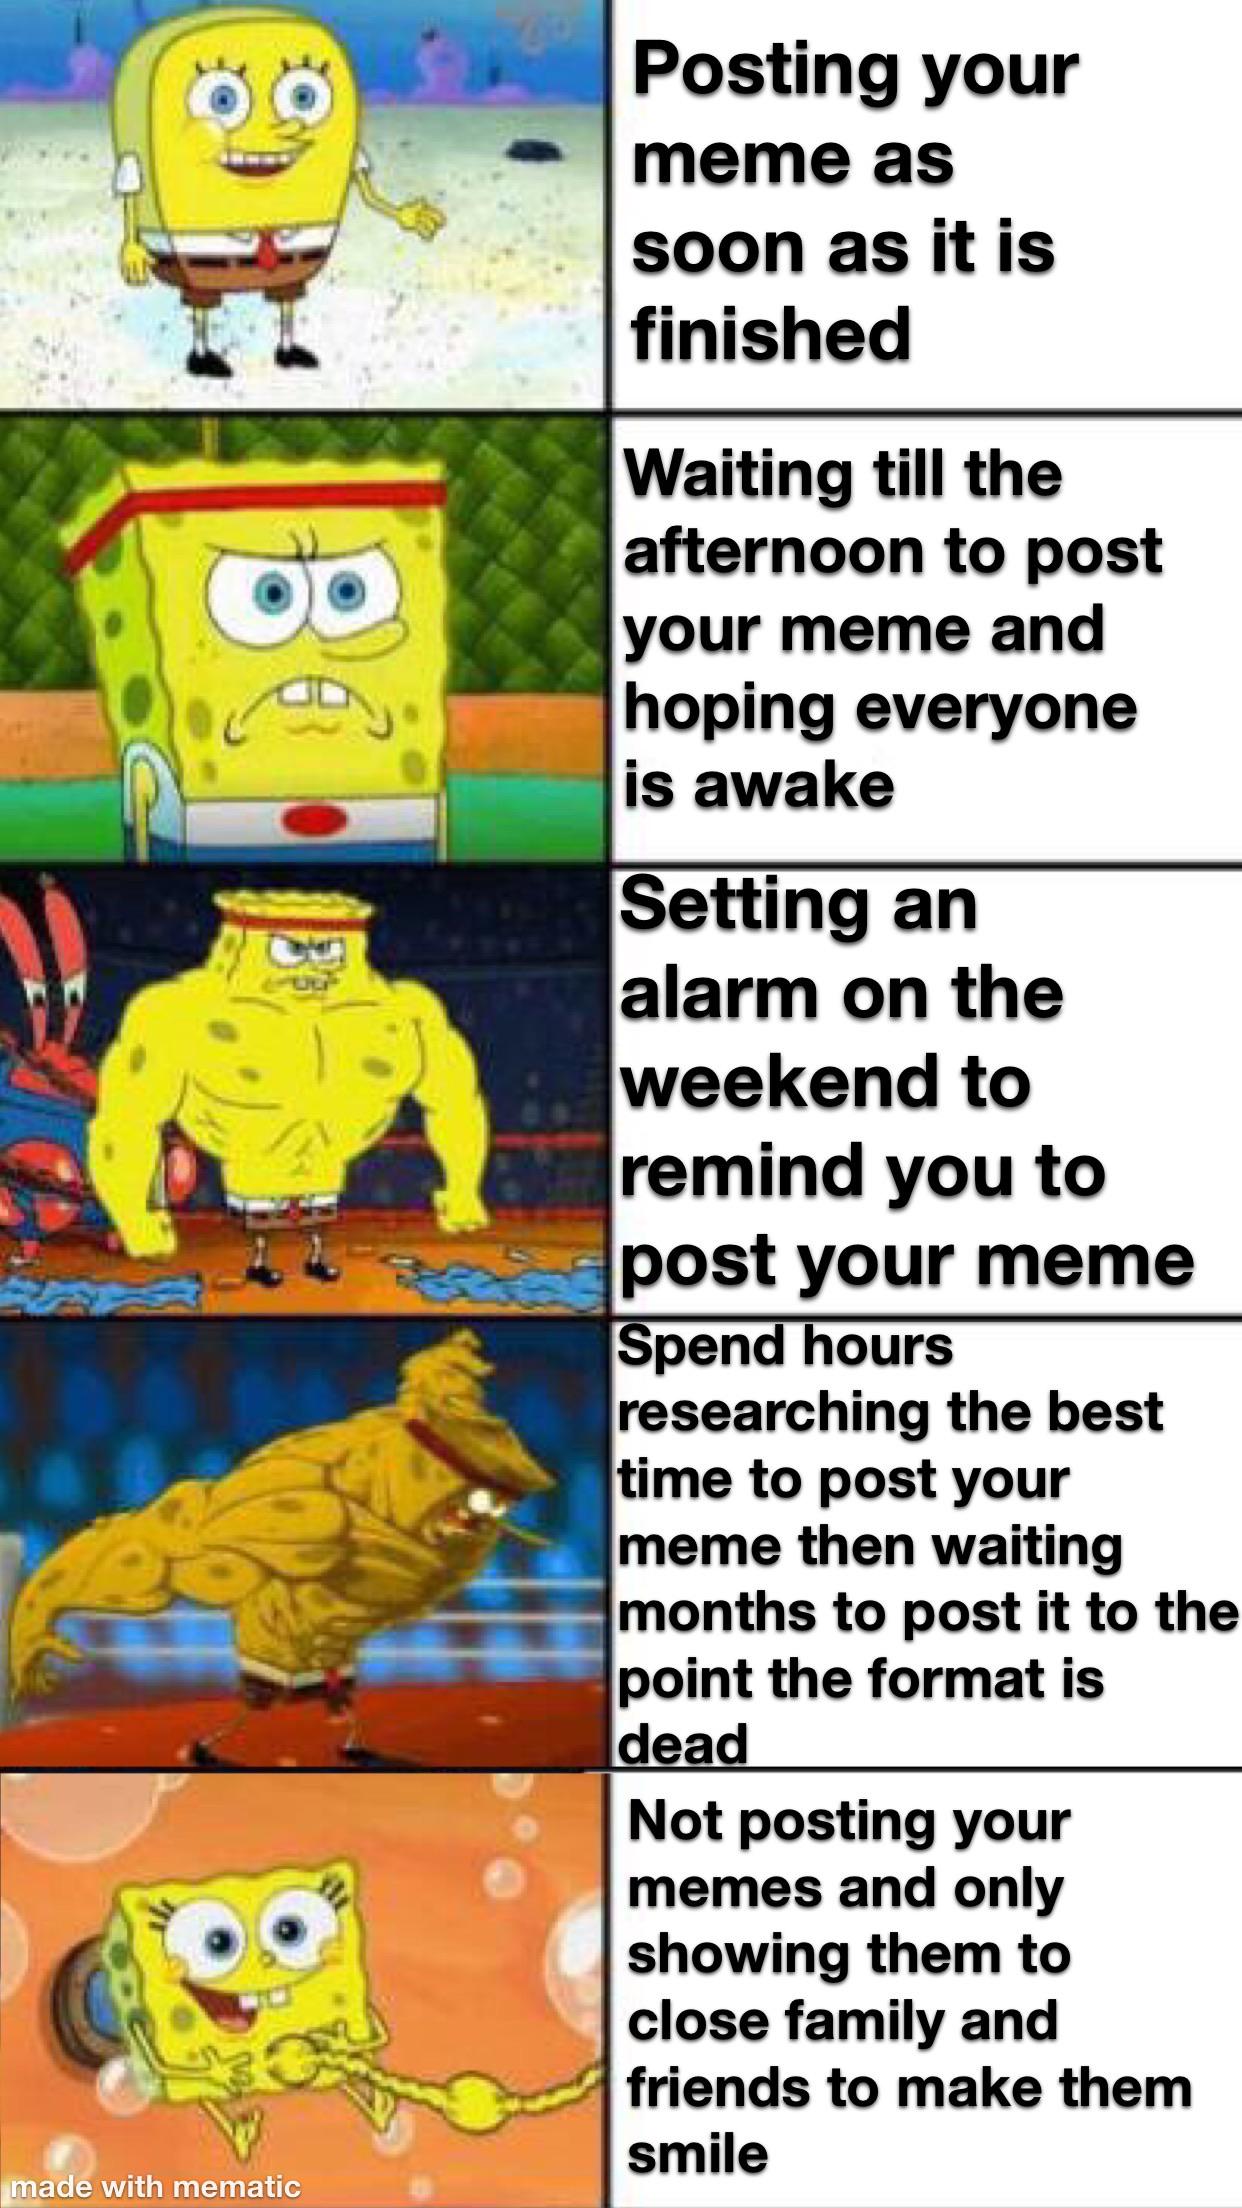 cute wholesome-memes cute text: 8. Posting your meme as soon as it is finished Waiting till the afternoon to post your meme and hoping everyone is awake Setting an alarm on the weekend to remind you to post your meme Spend hours researching the best time to post your meme then waiting months to post it to the point the format is dead Not posting your memes and only showing them to close family and friends to make them smile i@acl with mematic 